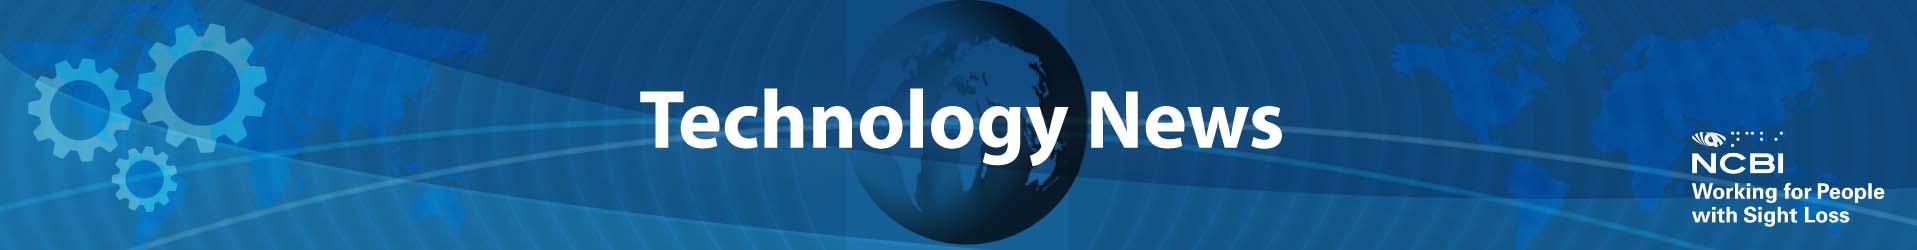 Image of Banner with text "Technology New" with a picture of a globe in the background